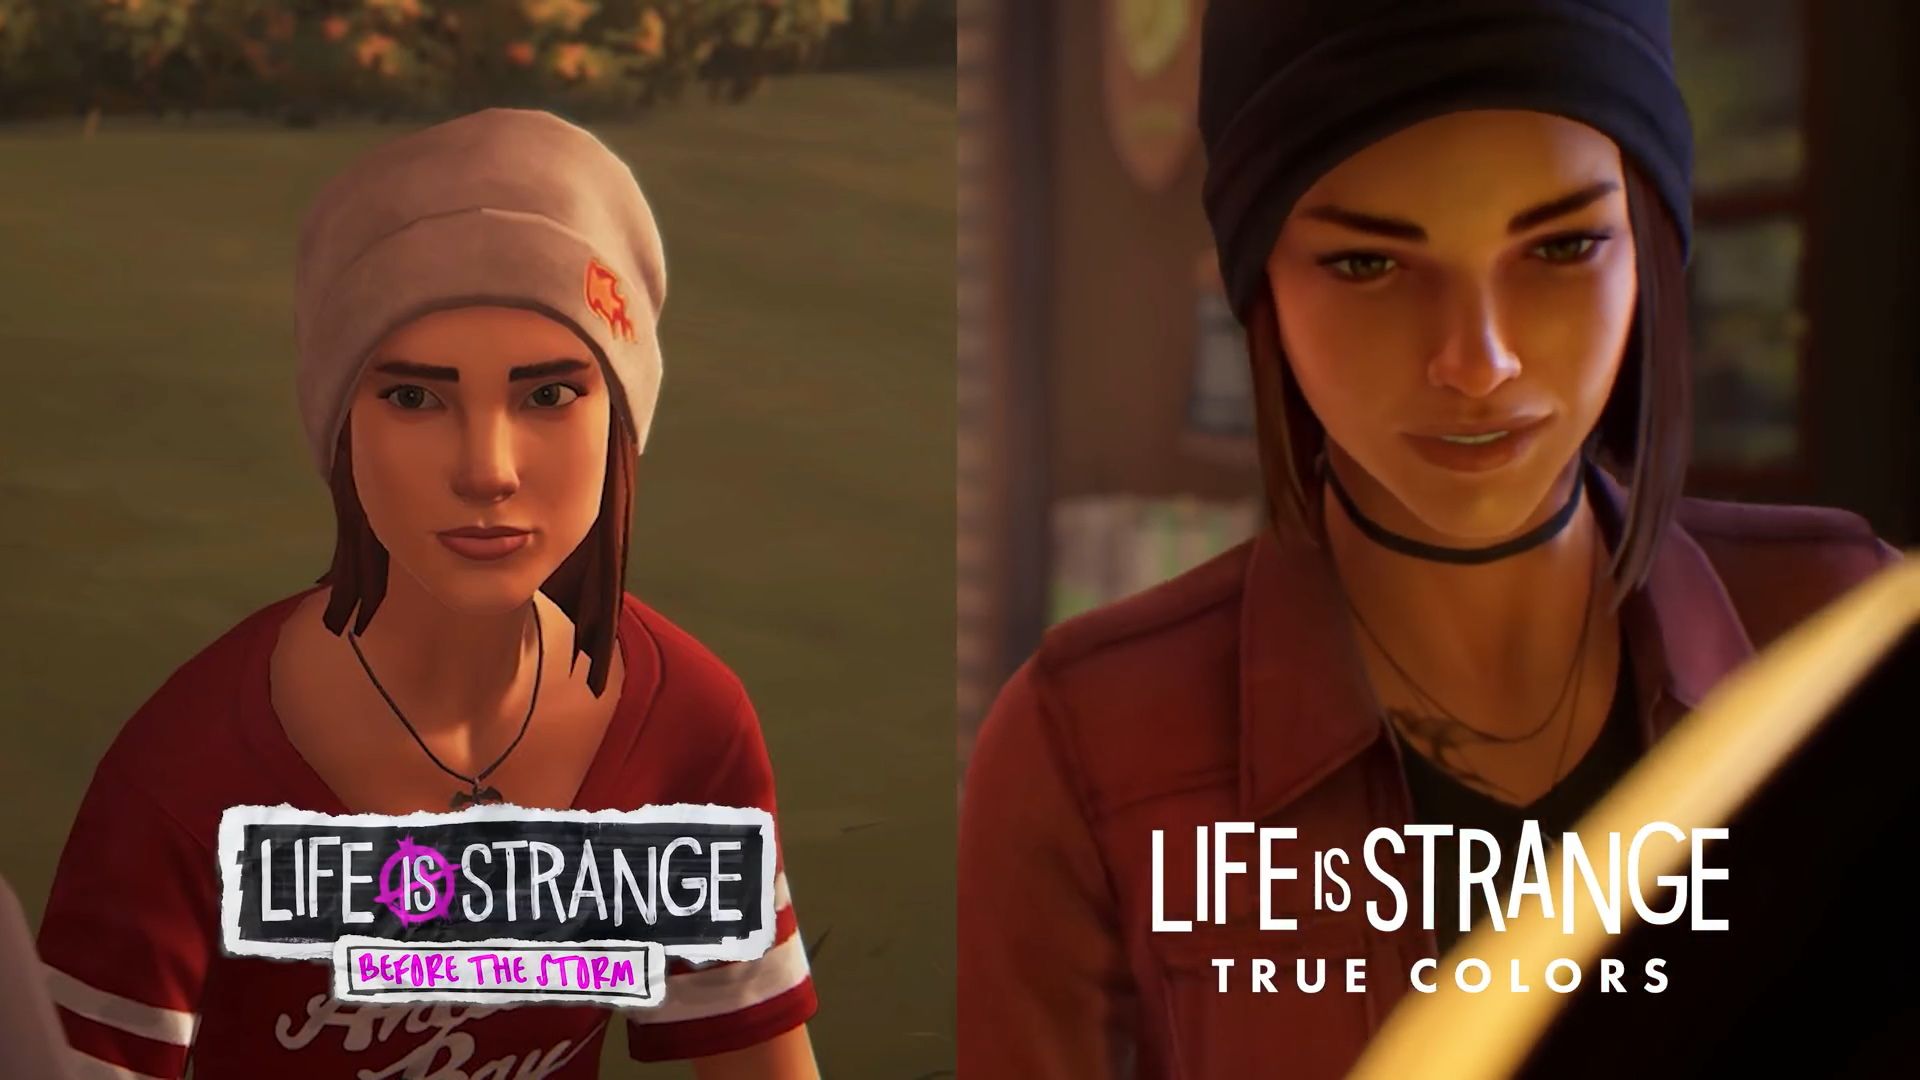 Life is Strange: True Colors - 'Meet Steph' and 'Meet the Cast' trailer